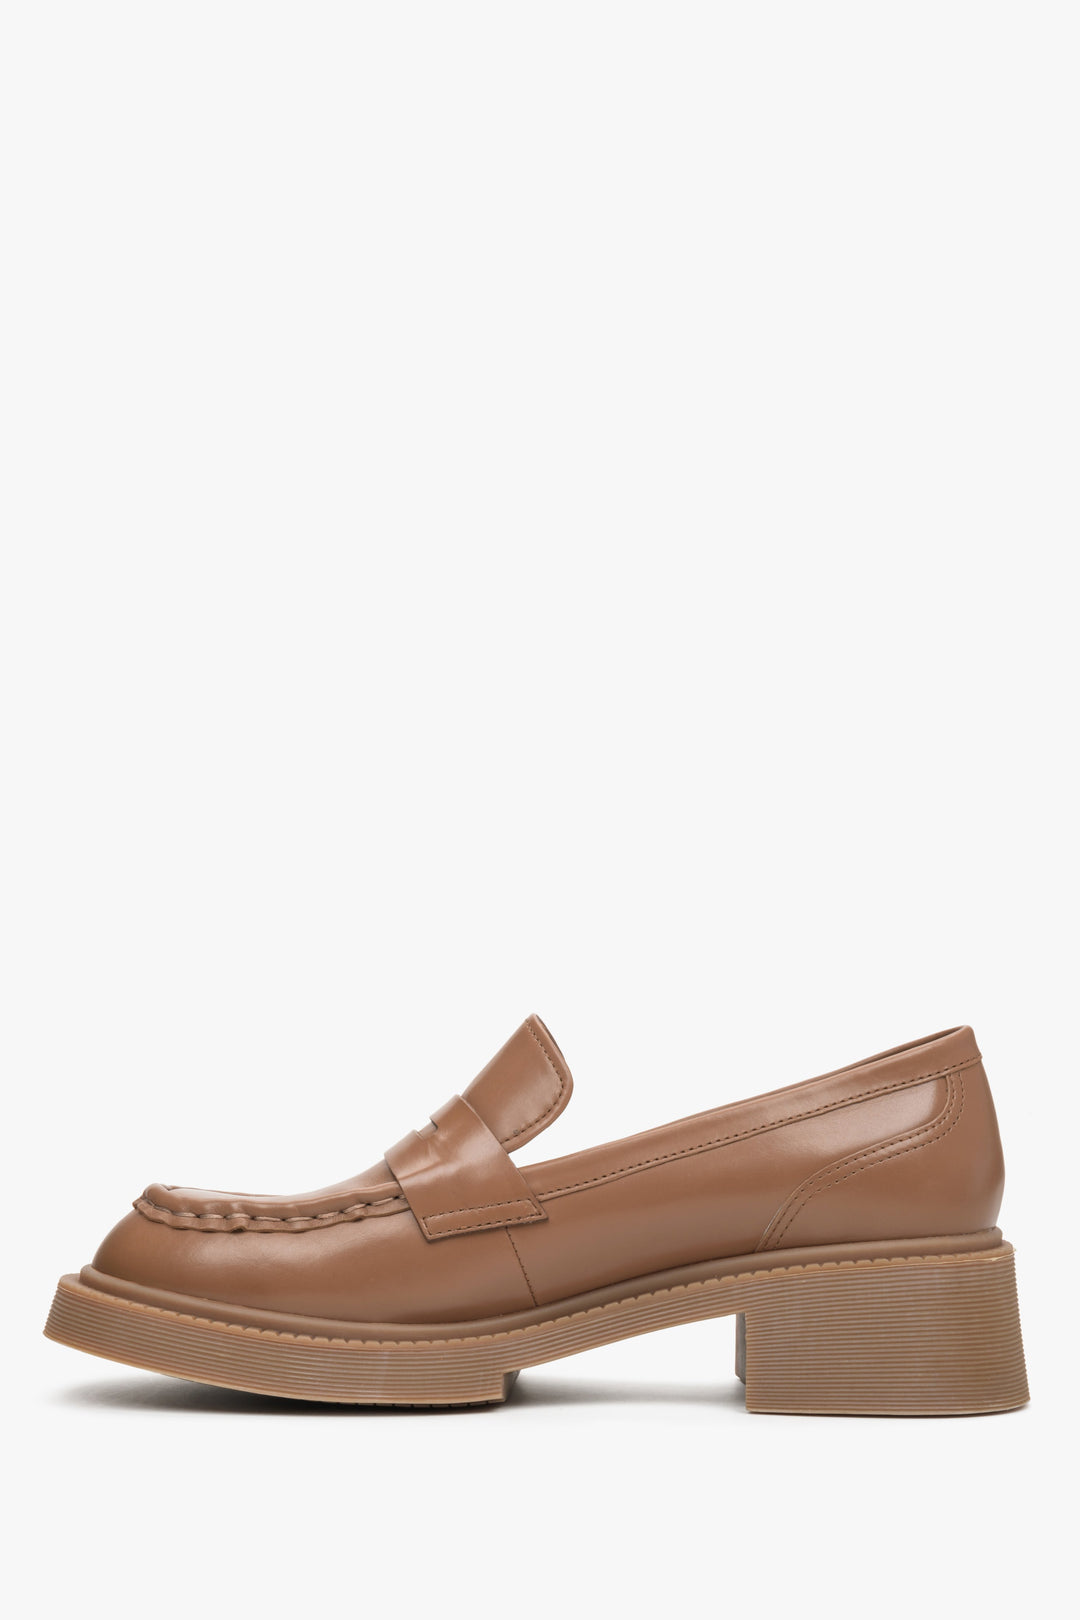 Leather, women's brown moccasins with a stable heel - shoe profile.